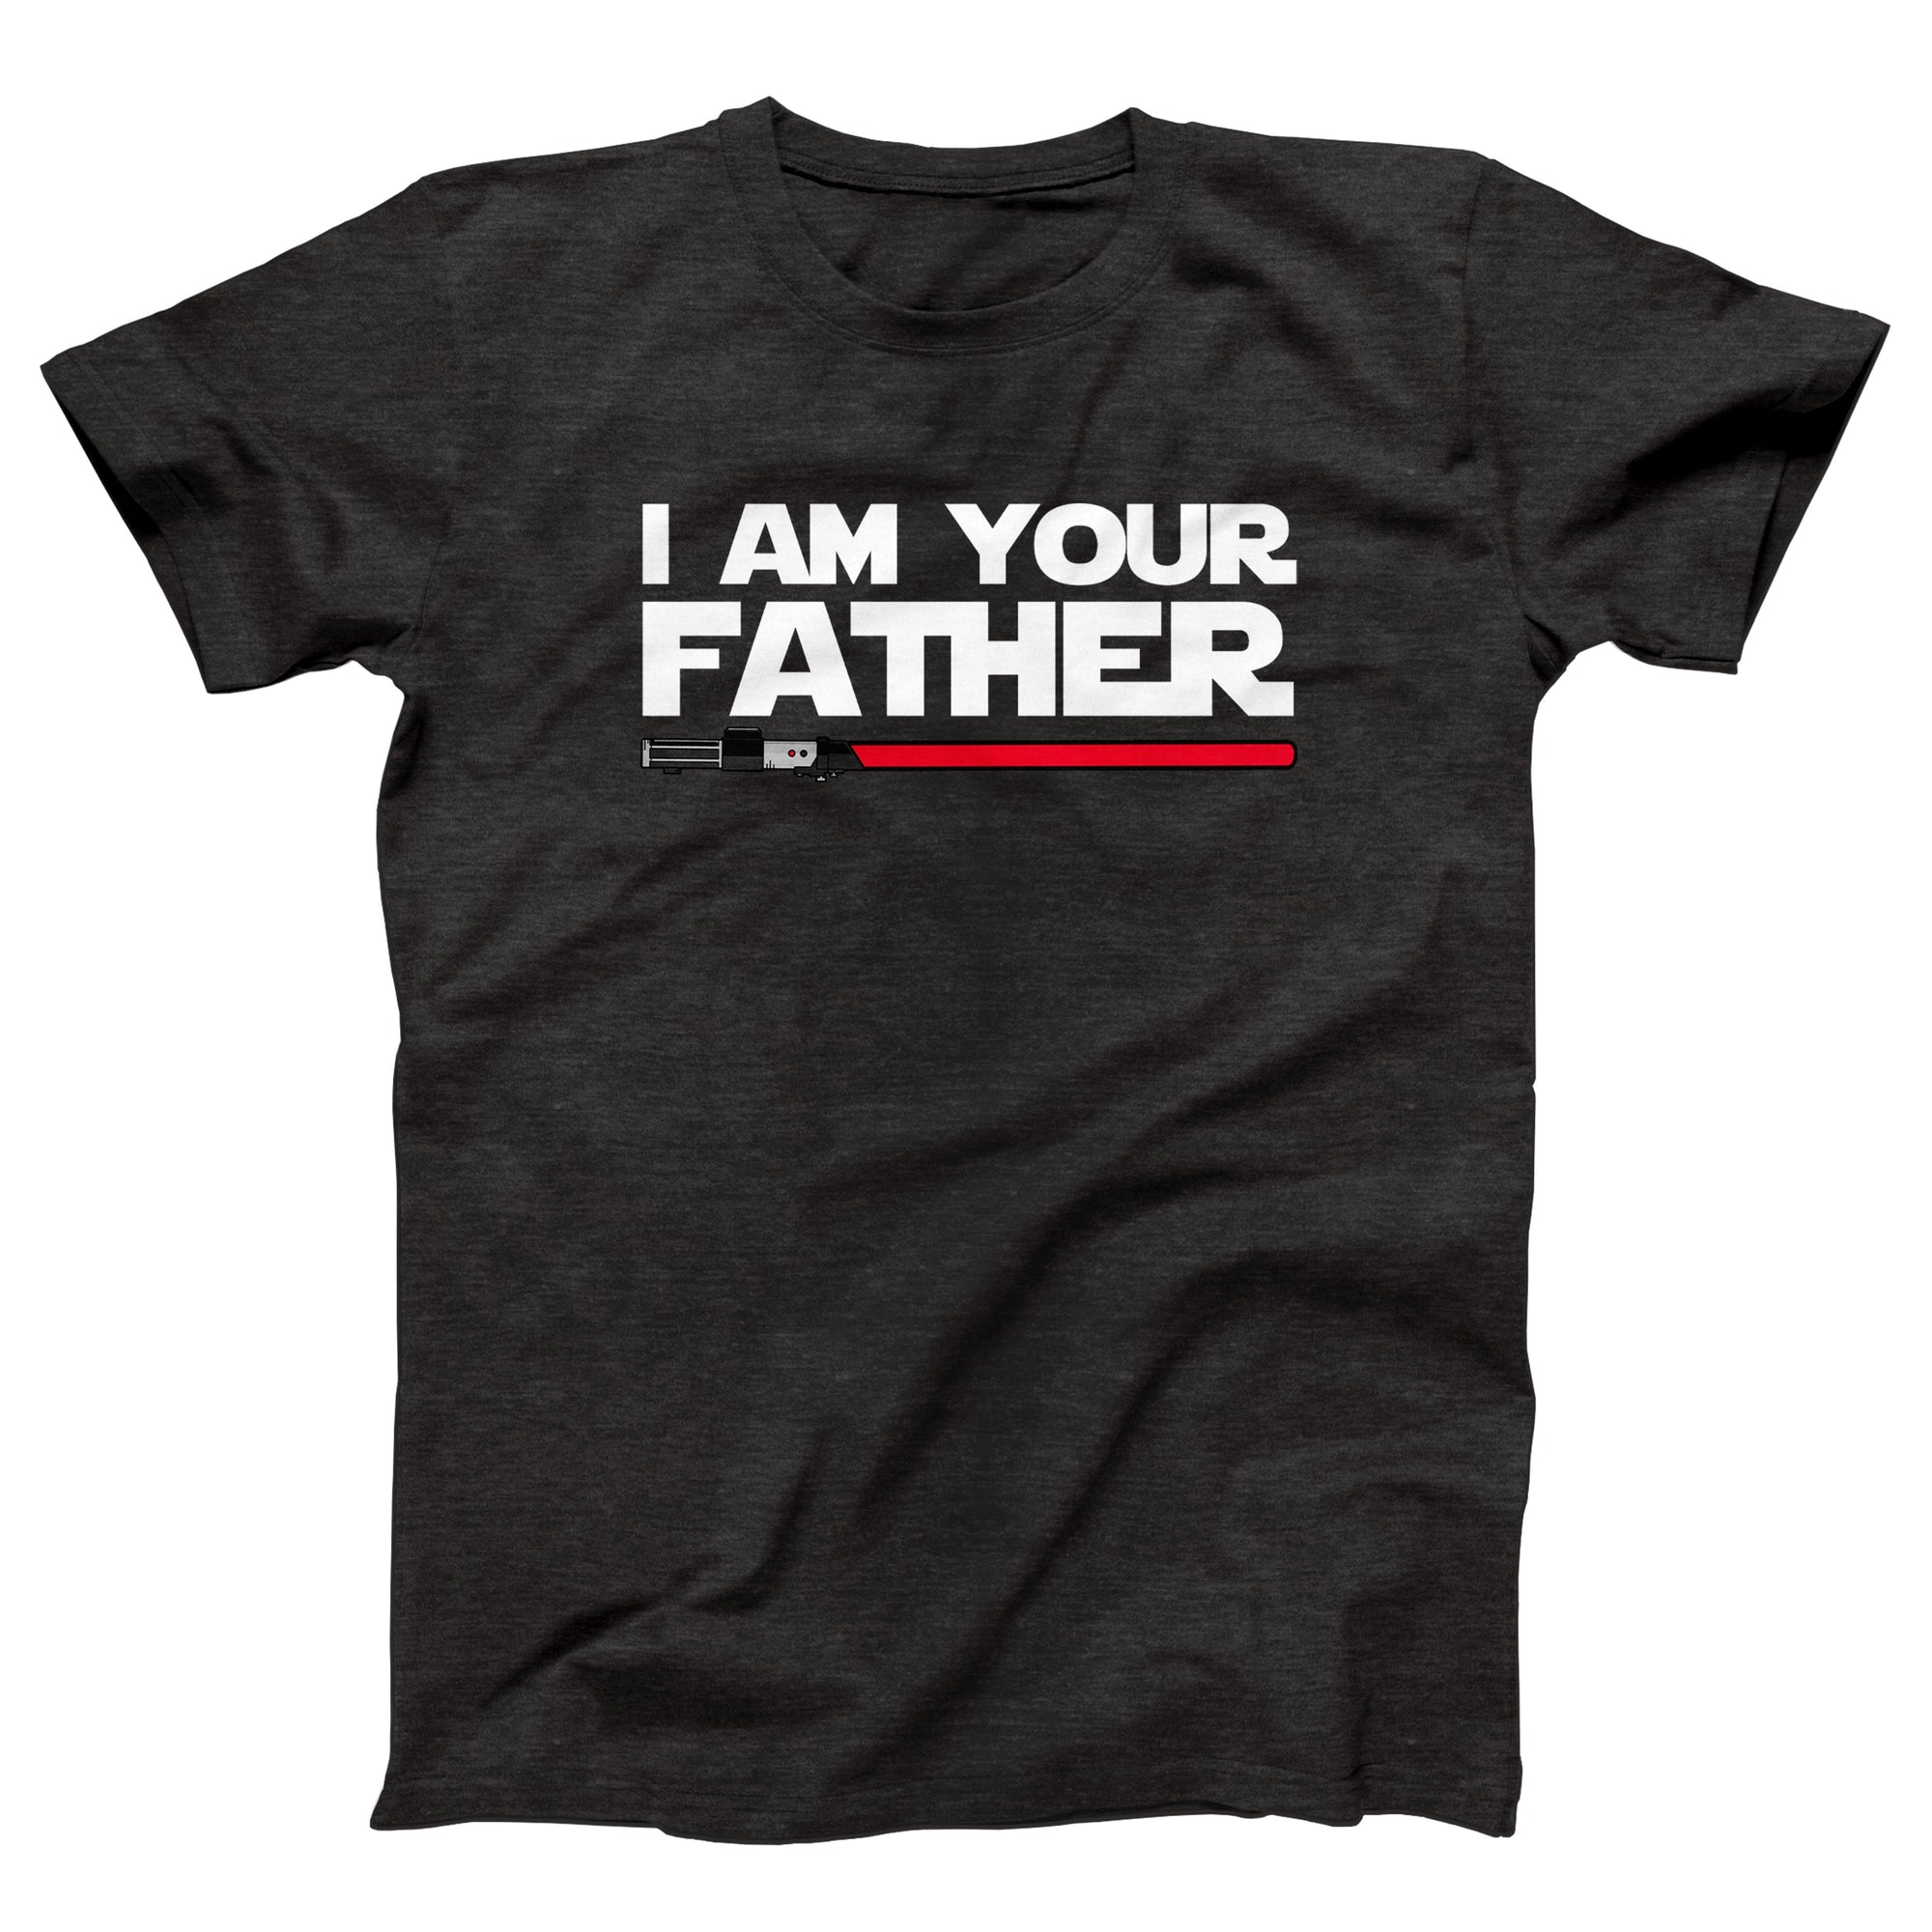 I Am Your Father Adult Unisex T-Shirt - Twisted Gorilla